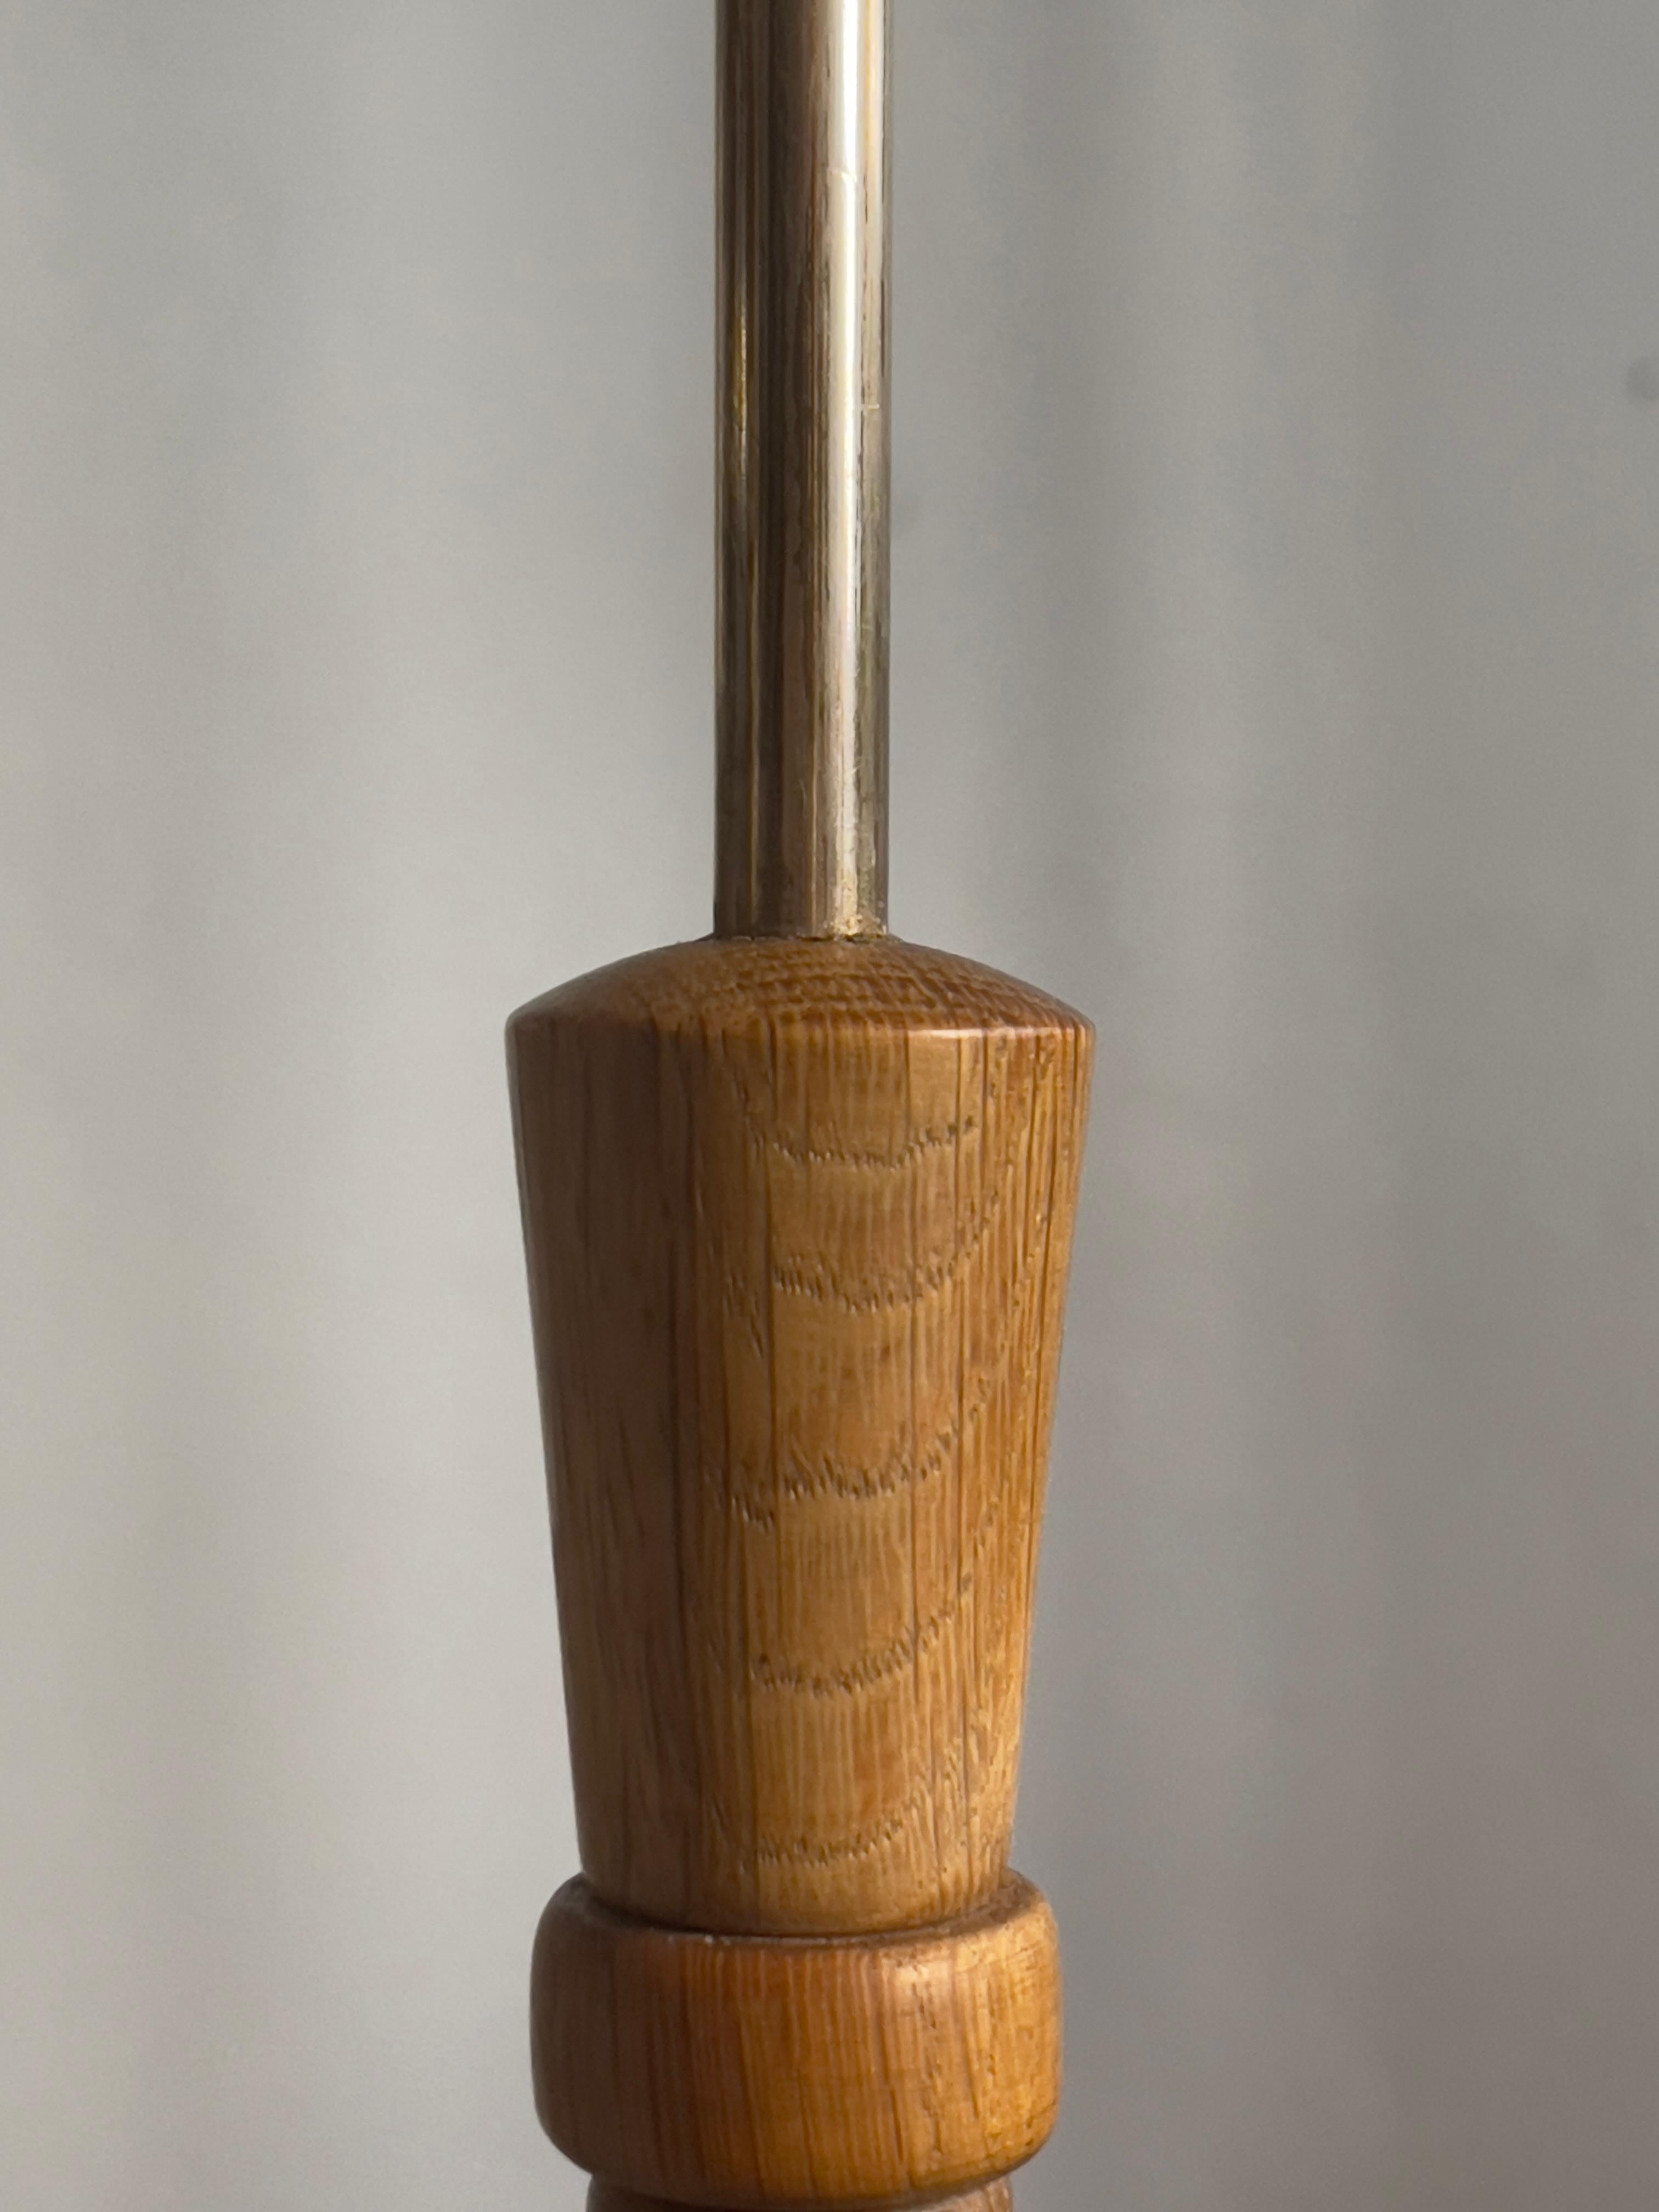 Rare 1960s Danish Modern Floor Lamp in Solid Oak and Brass with New Linen Shade For Sale 5